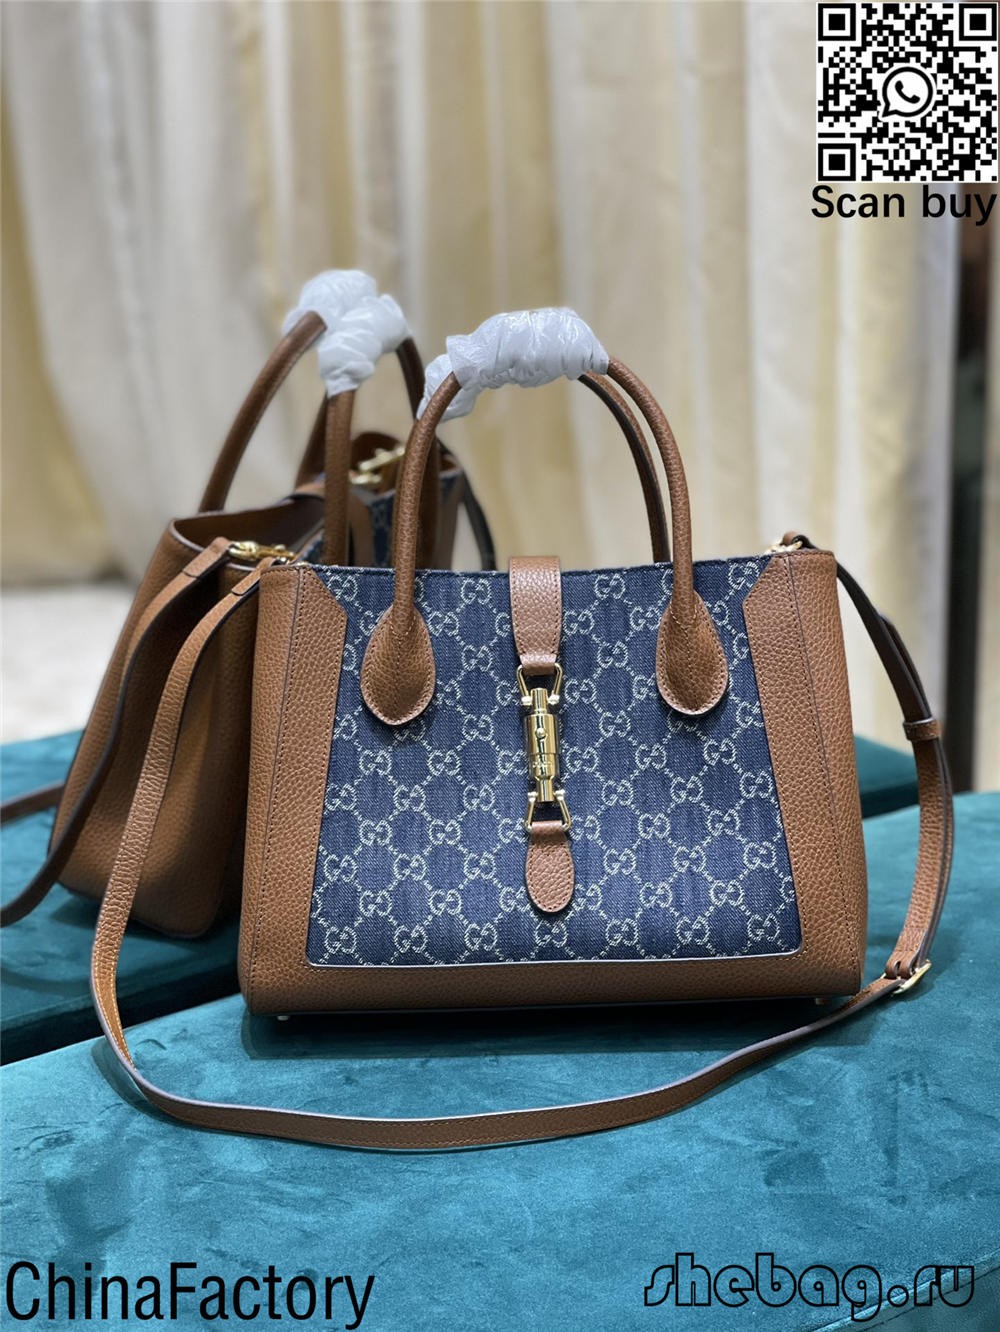 Top 10 Most worth buying lightweight replica designer bags review (2022 updated)-Best Quality Fake designer Bag Review, Replica designer bag ru